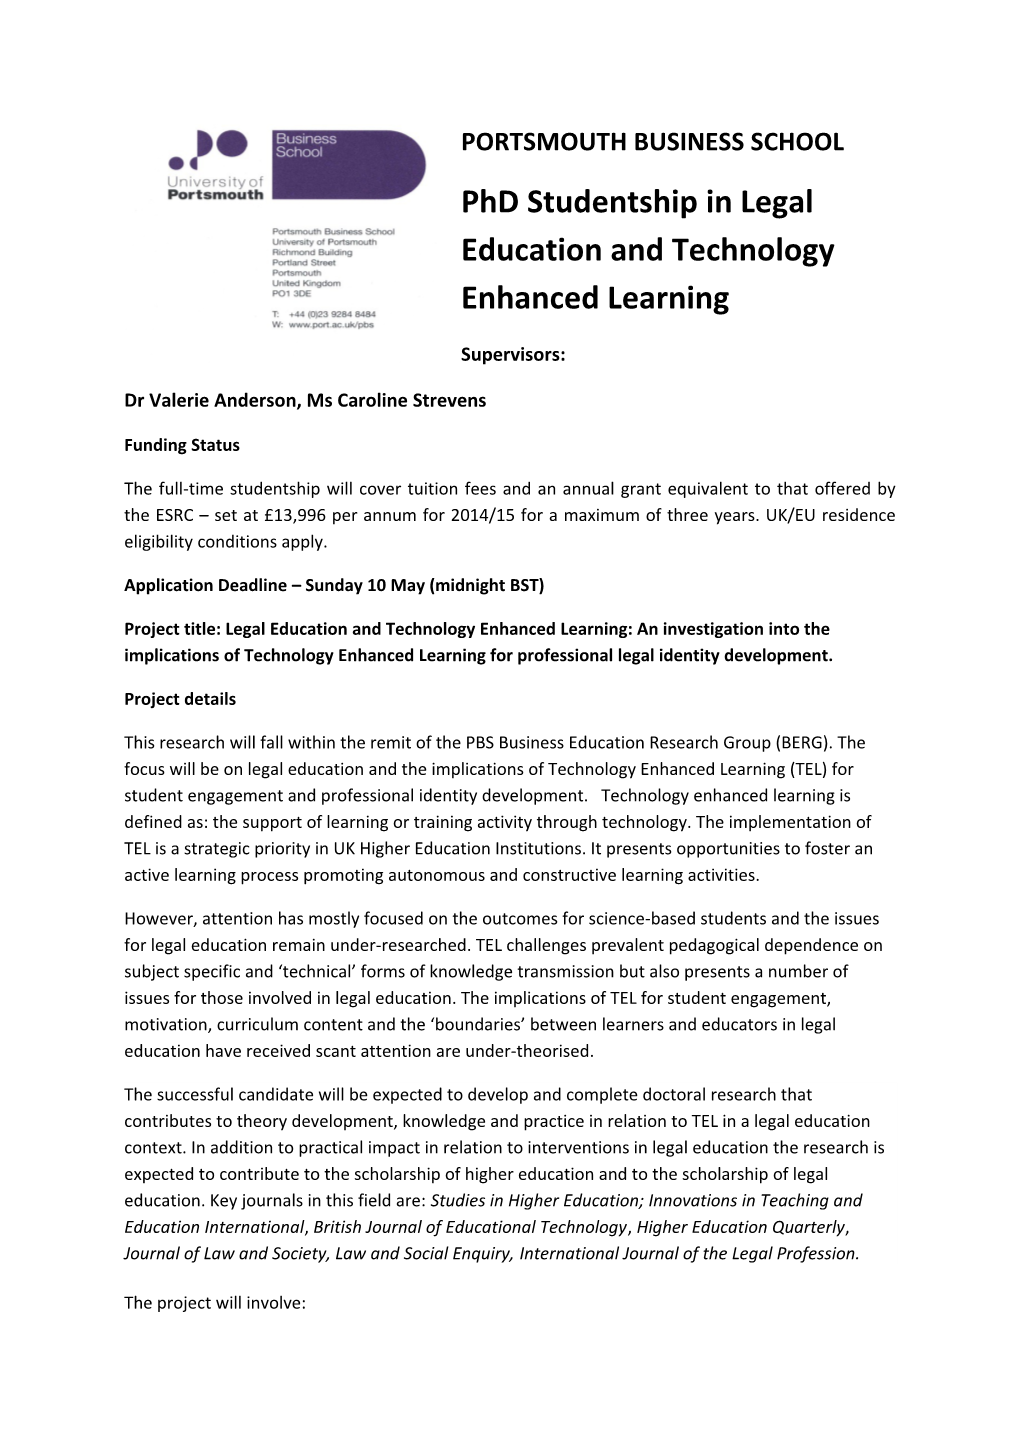 Phd Studentship Inlegal Education and Technology Enhanced Learning